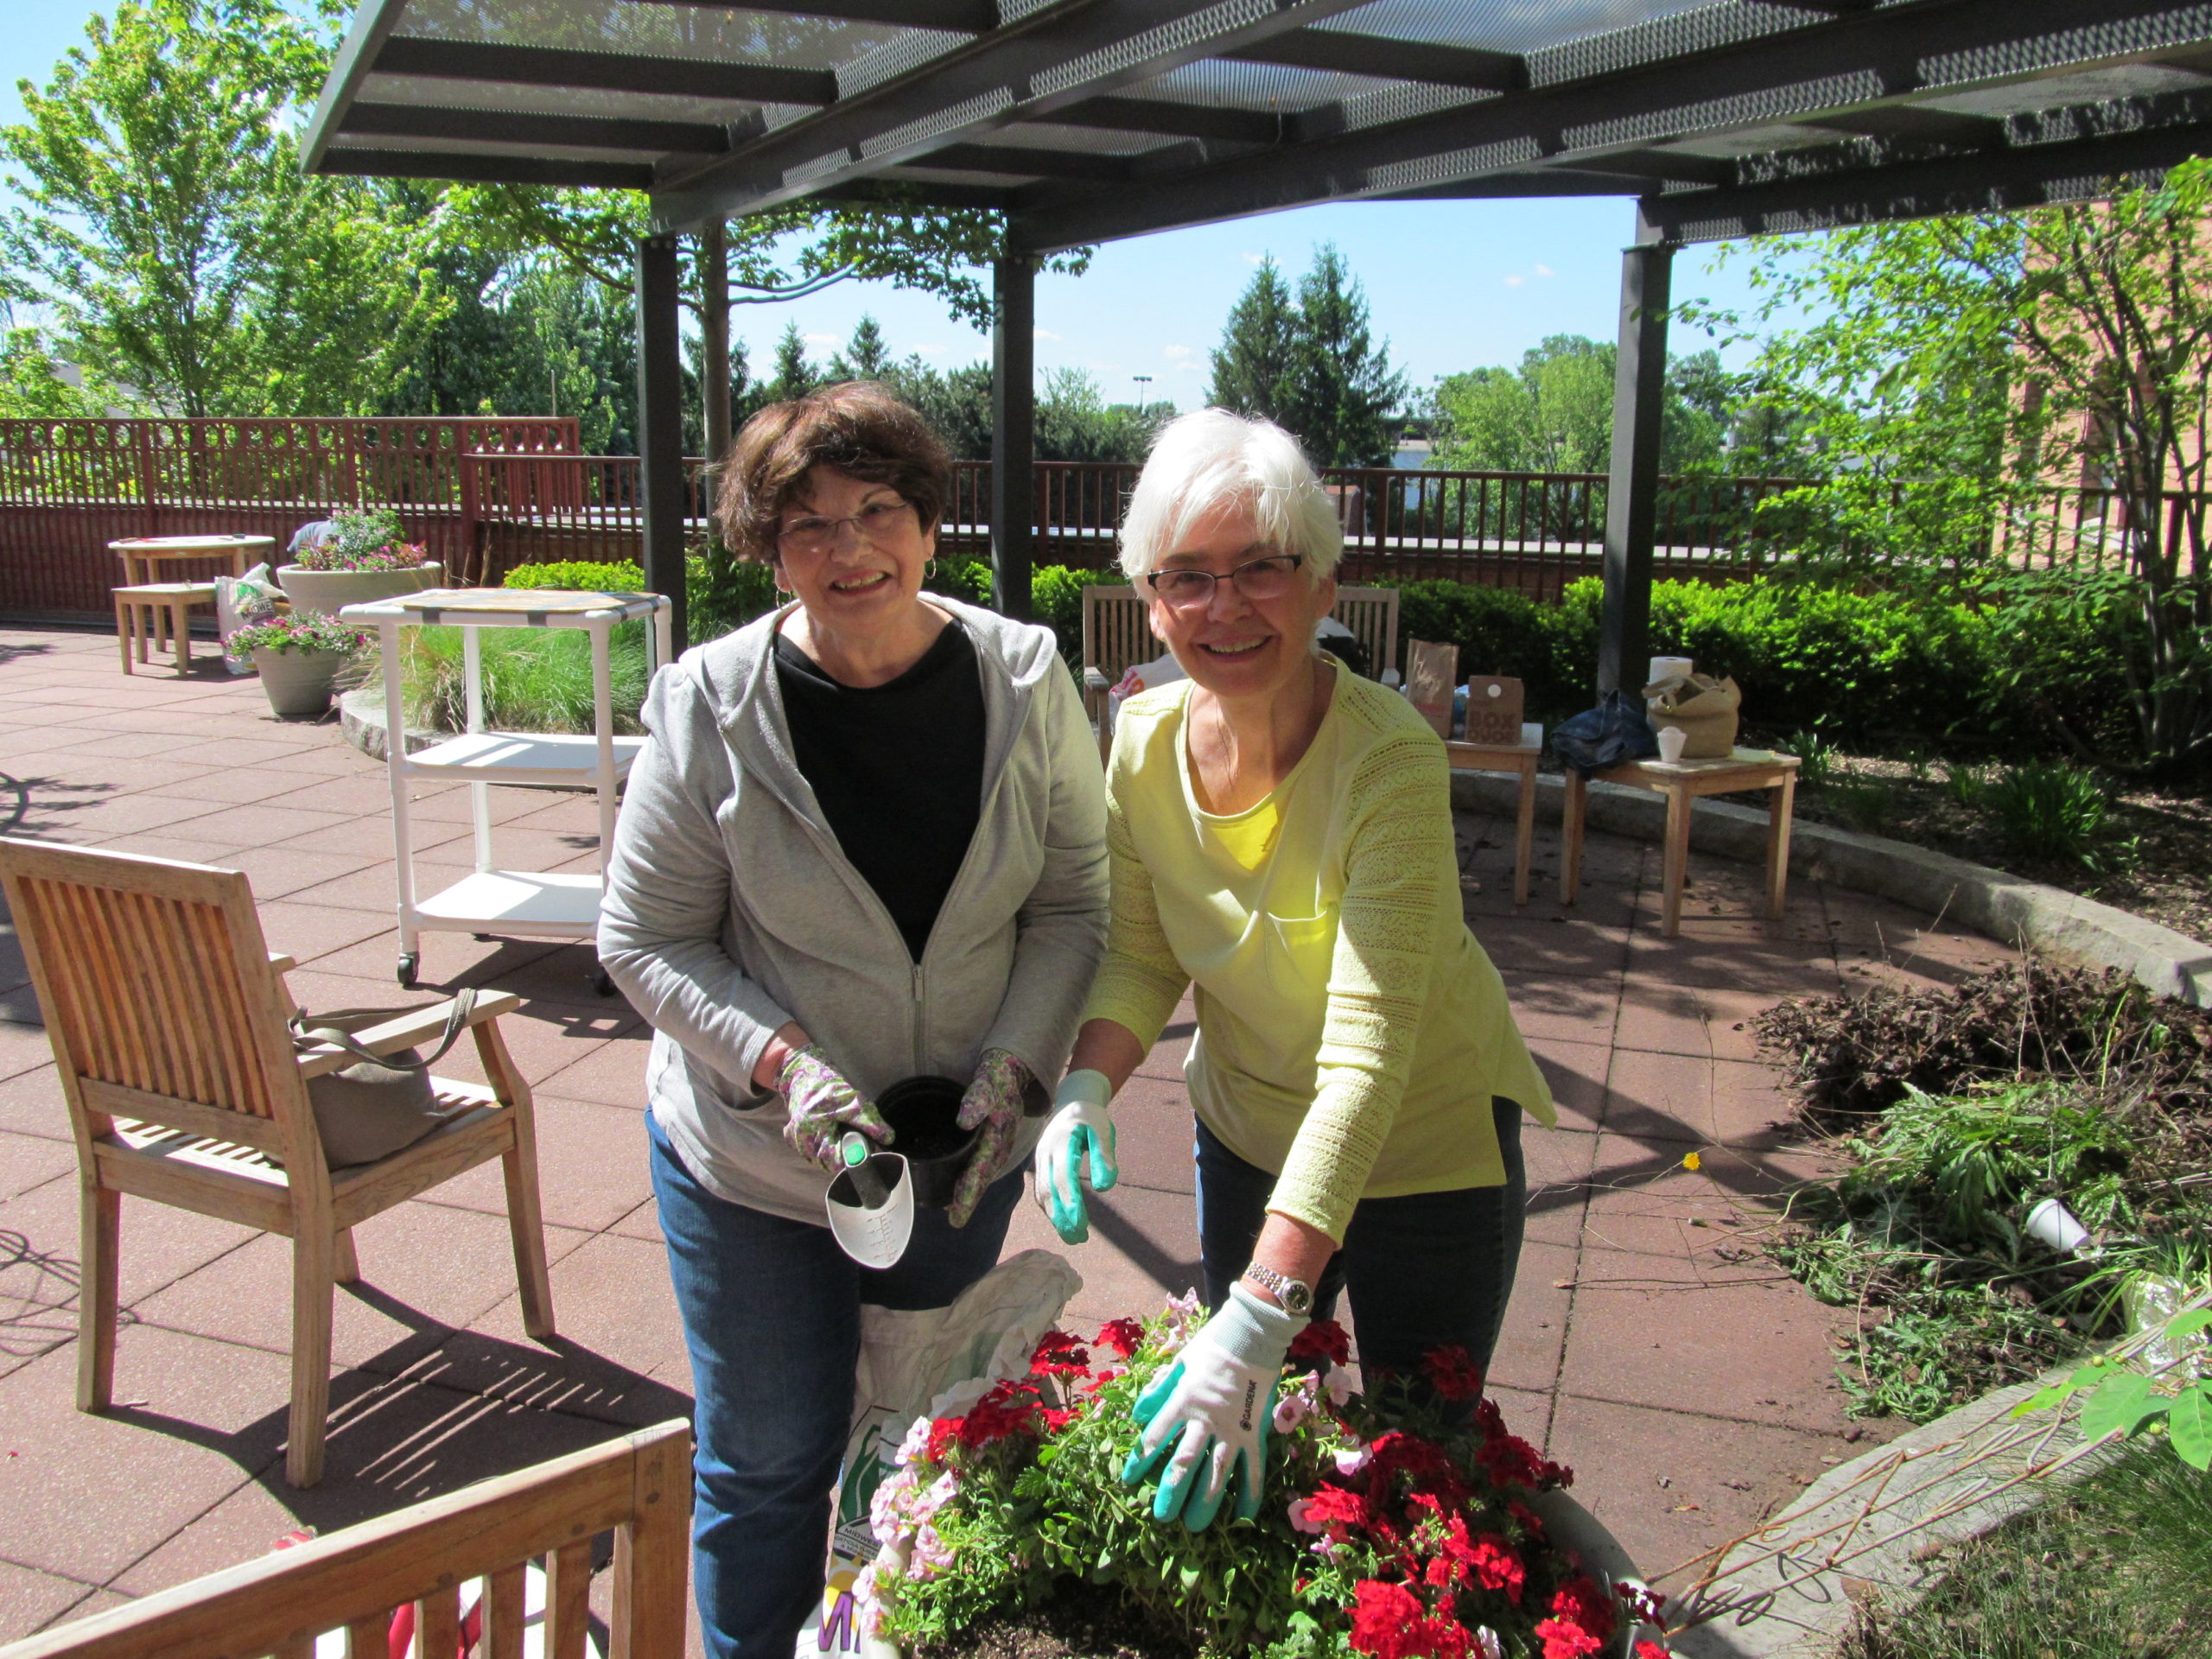 Our residents at St. Patrick's Residence enjoy activities in our outdoor spaces